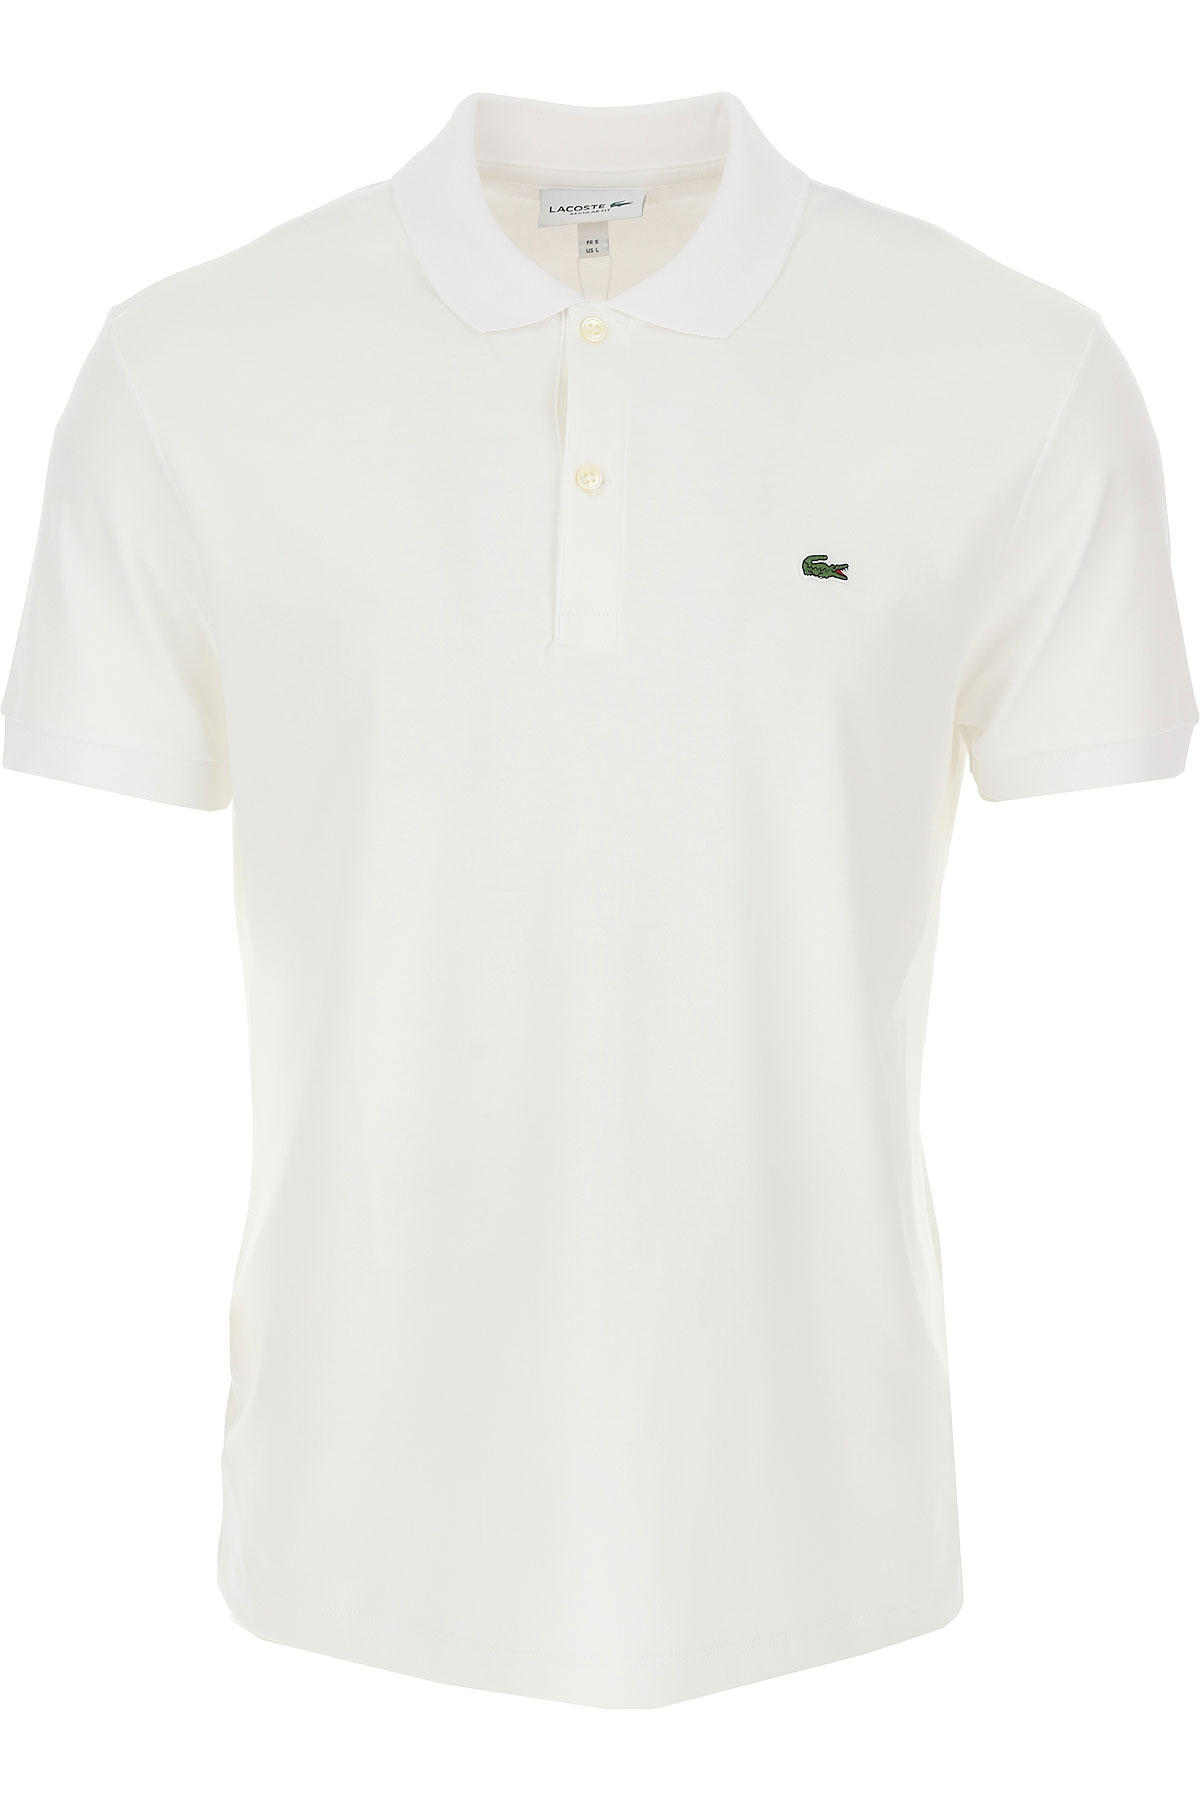 Mens Clothing Lacoste, Style code: dh2050-001-